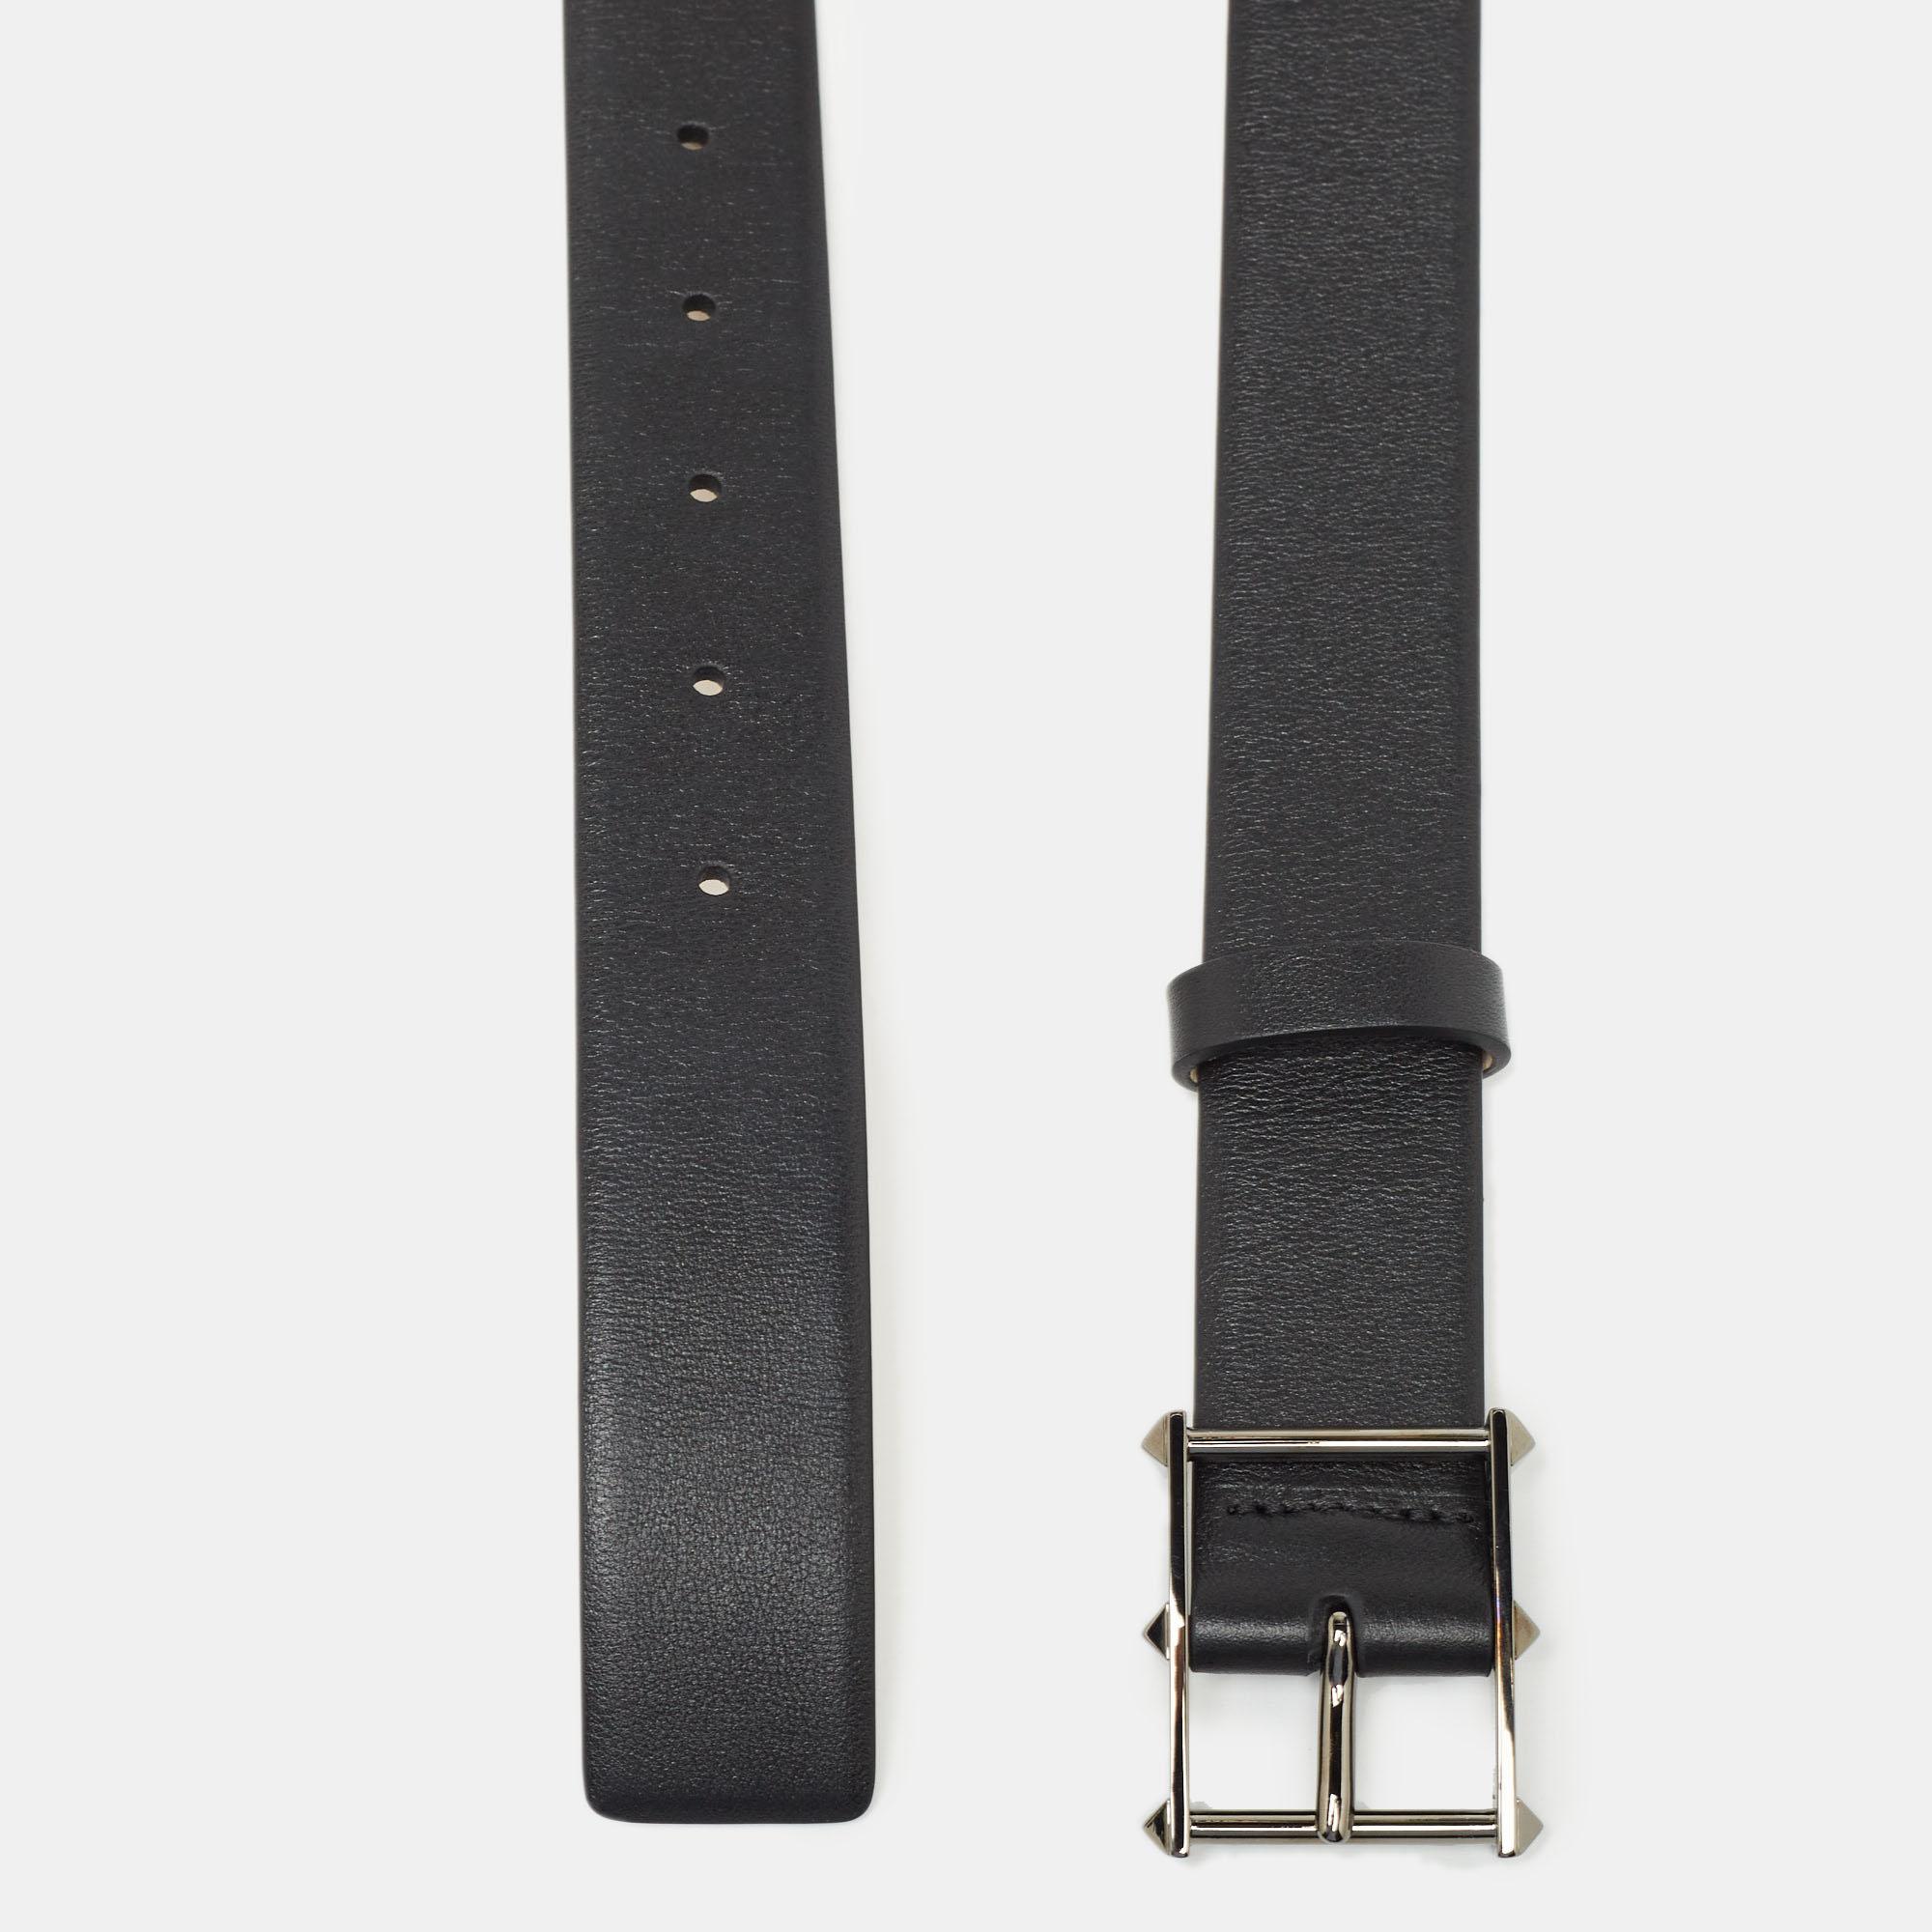 Add a sleek finish to your OOTD with this Valentino black Rockstud belt. It is carefully crafted to last well and boost your style for a long time.

Includes
Original Dustbag, Original Box, Info Booklet, Brand Tag